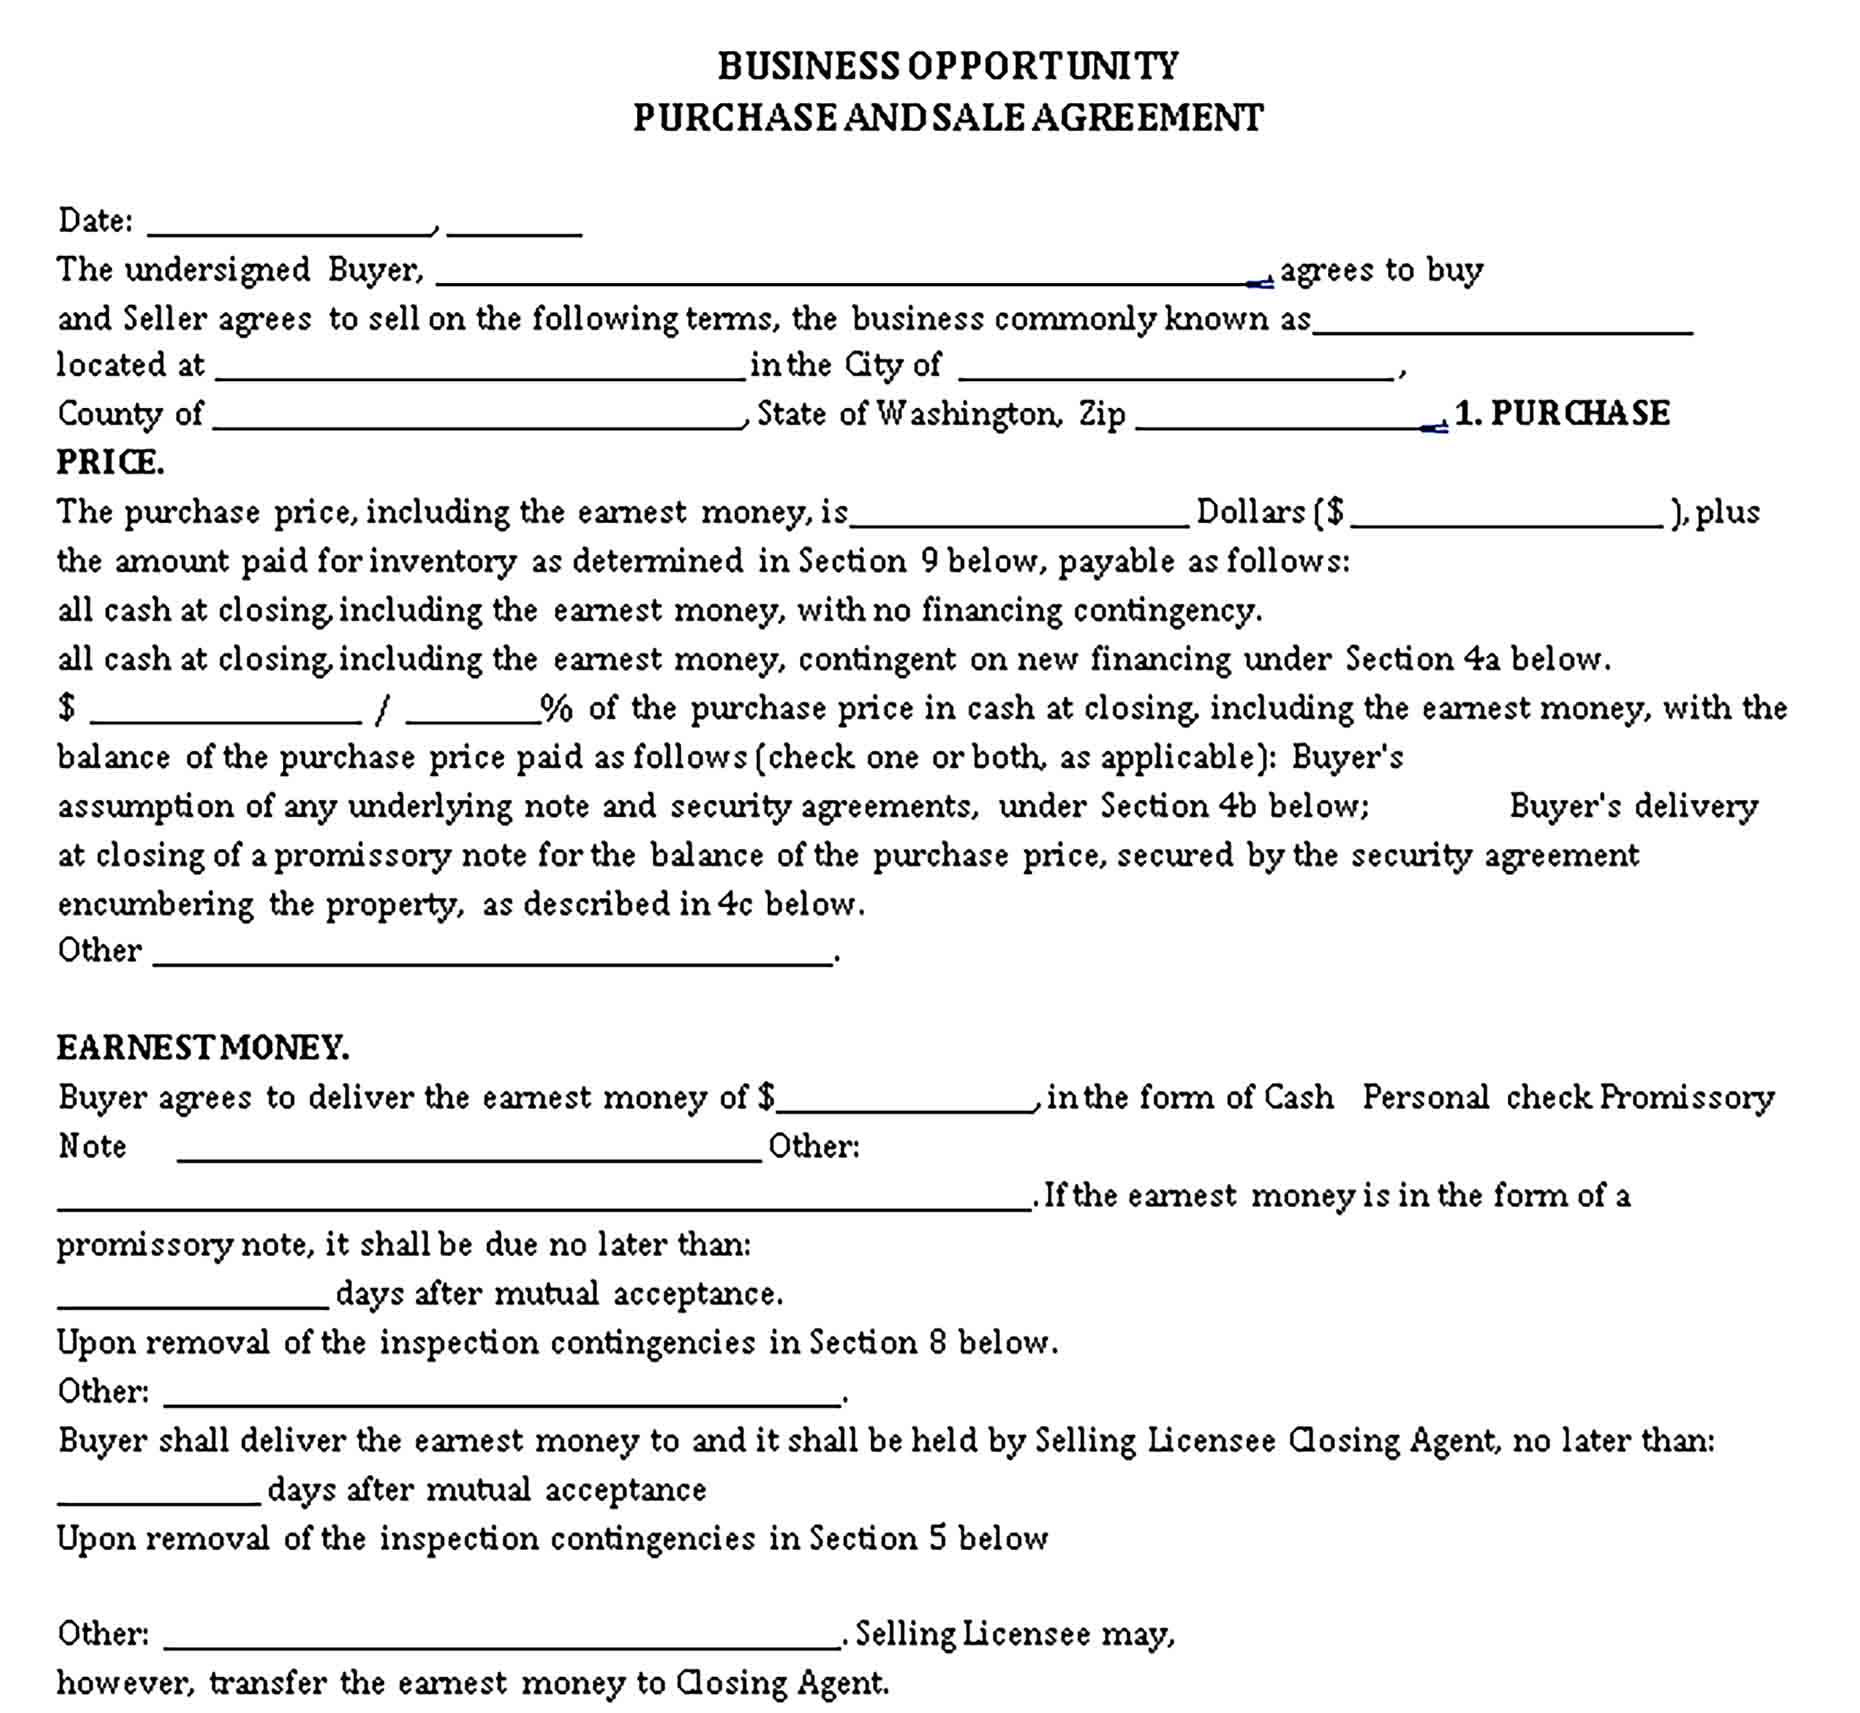 Templates Business Opportunity Purchase Sale Agreement Sample